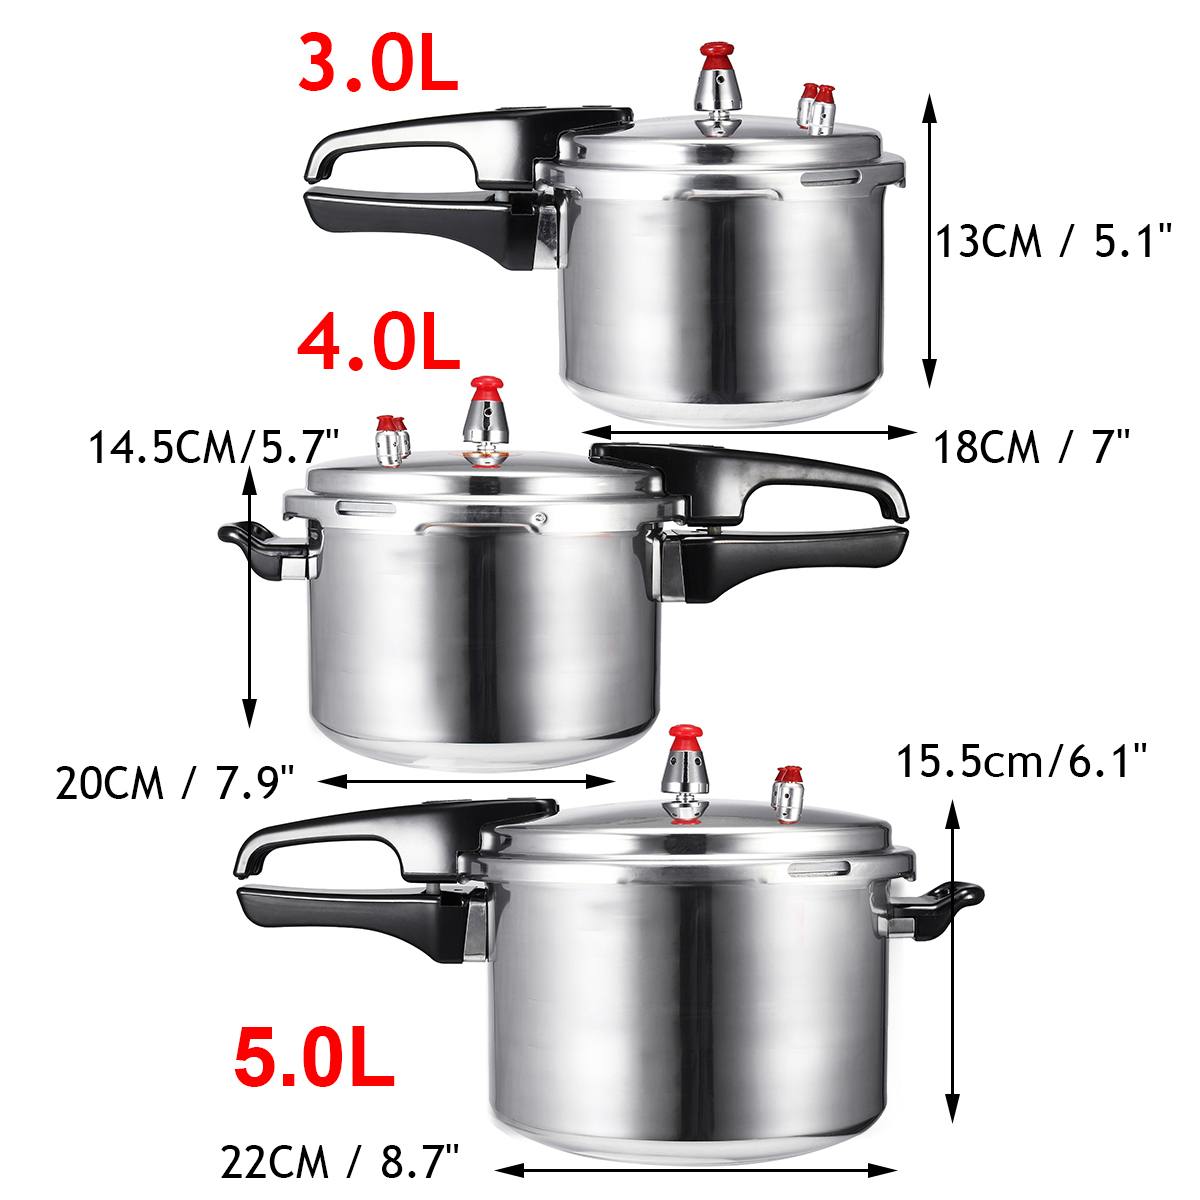 Kitchen Pressure Cooker Cookware Soup Meats Pot Gas Stove/Open Fire Pressure Cooker Outdoor Camping Cook Tool Steamer